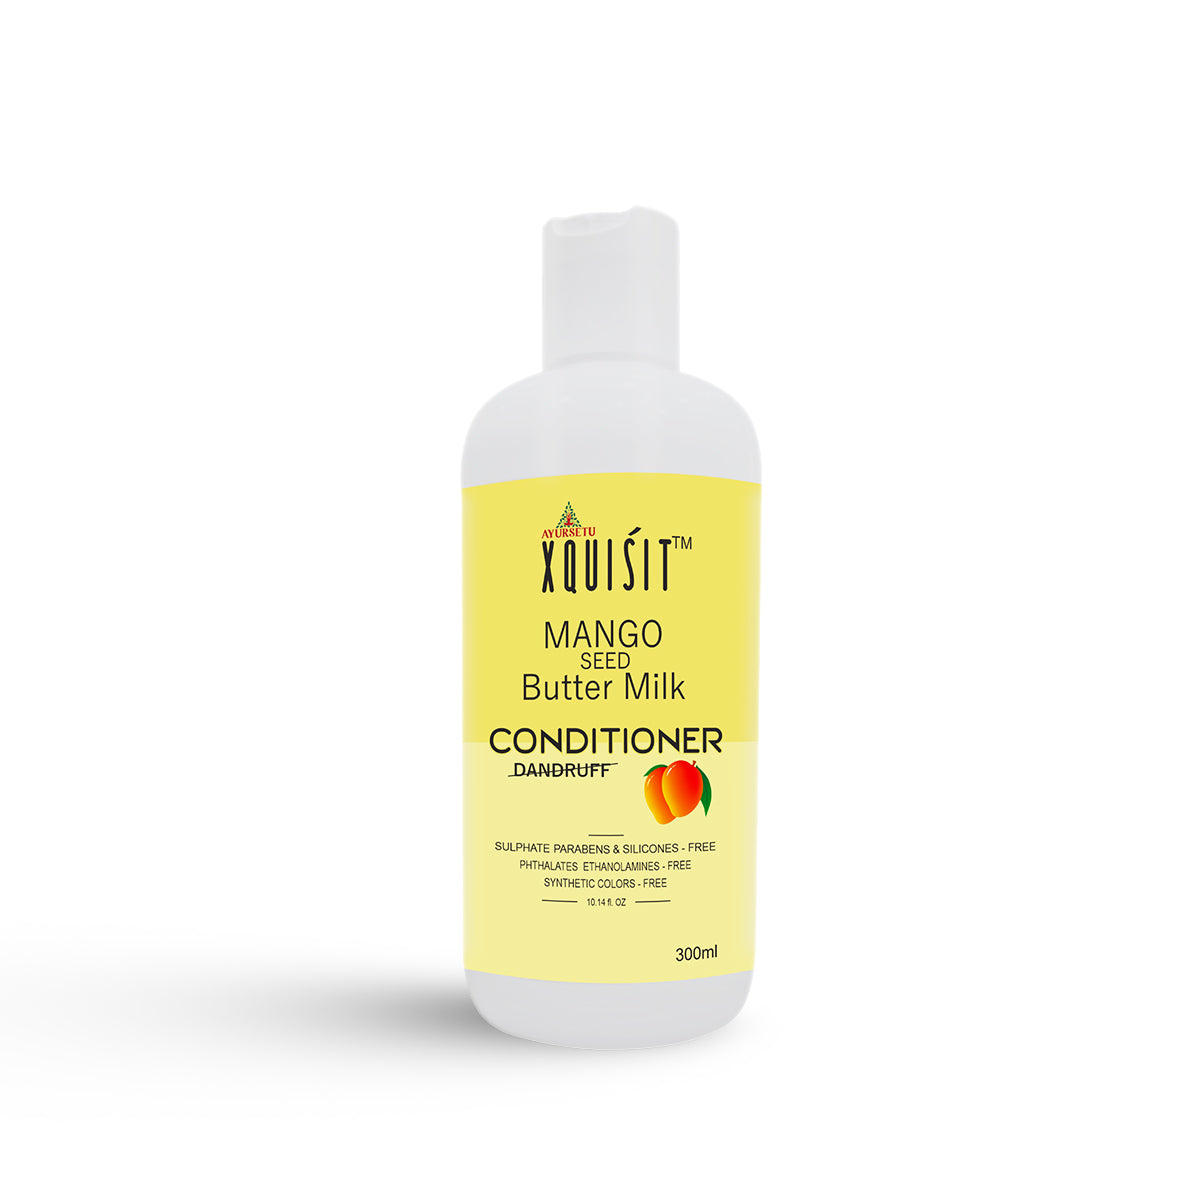 XQUISIT Mango Seed Butter Milk Conditioner